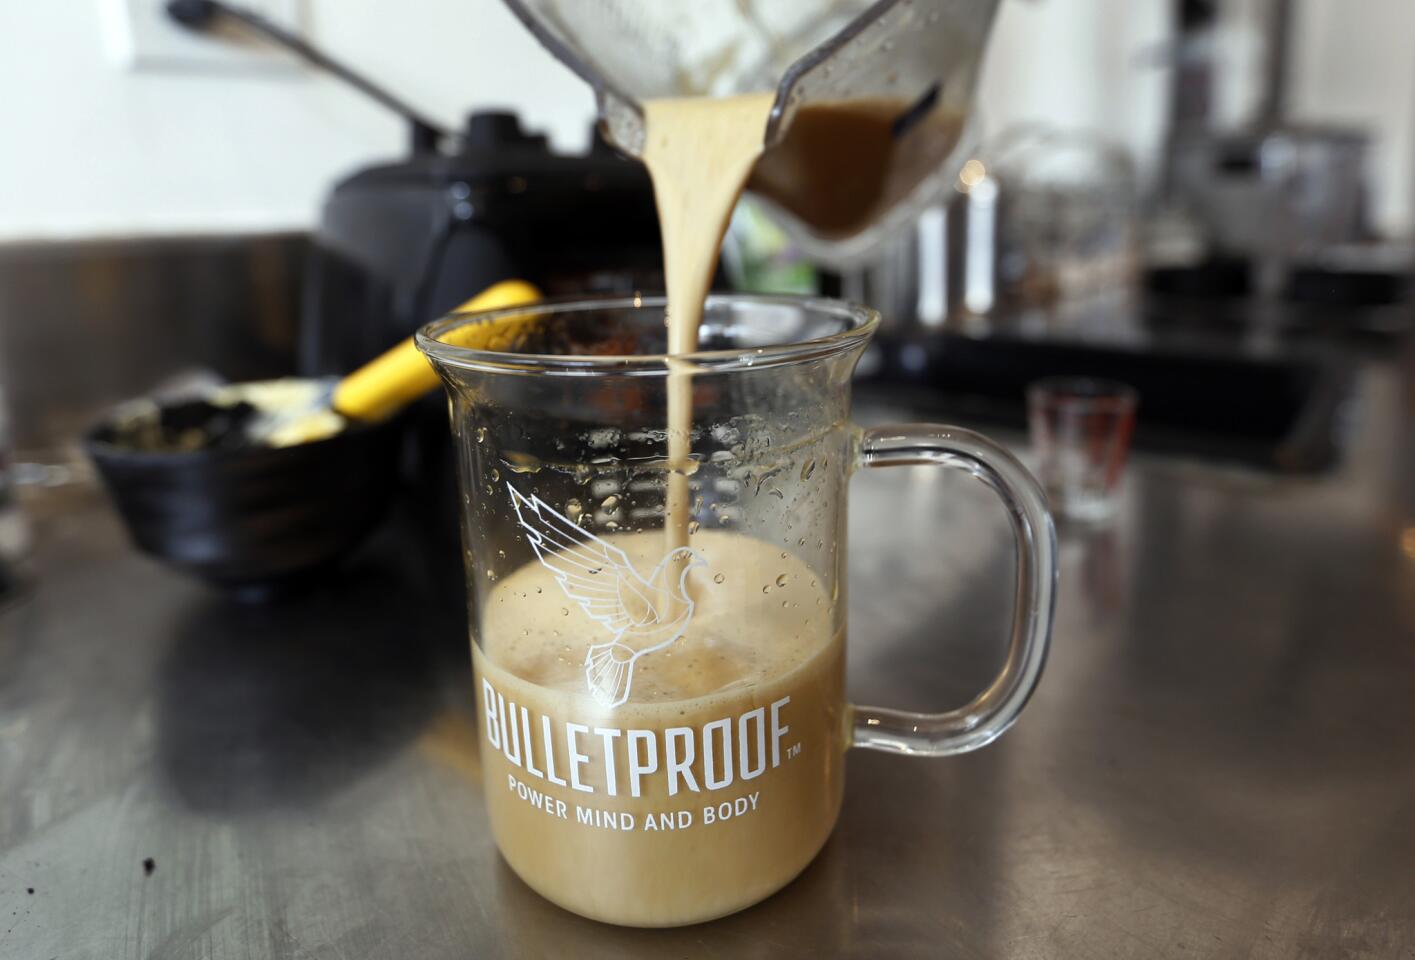 A closer look at the new Bulletproof Coffee shop